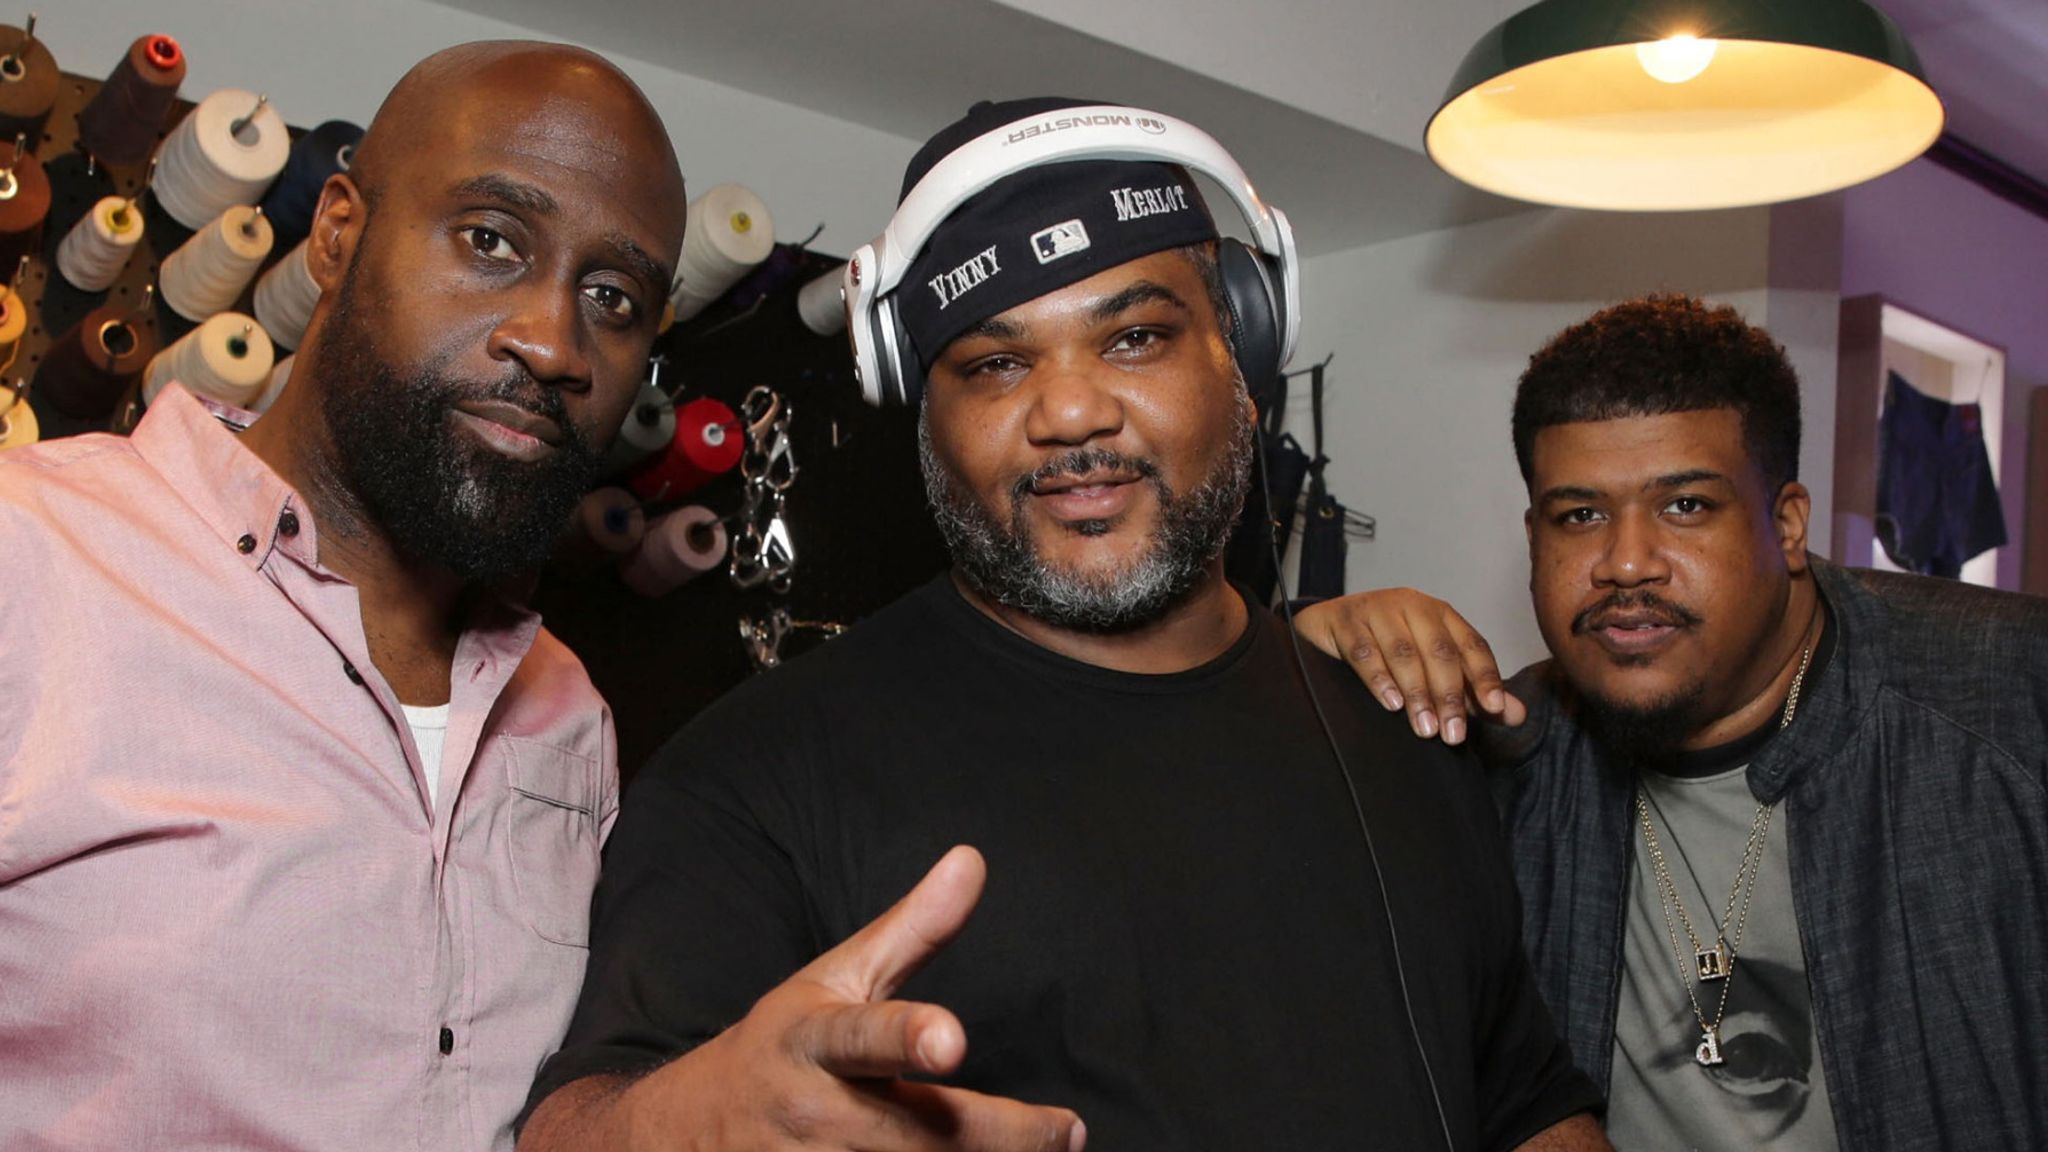 In 2023, De La Soul's Catalog Will Finally Be Available For Streaming